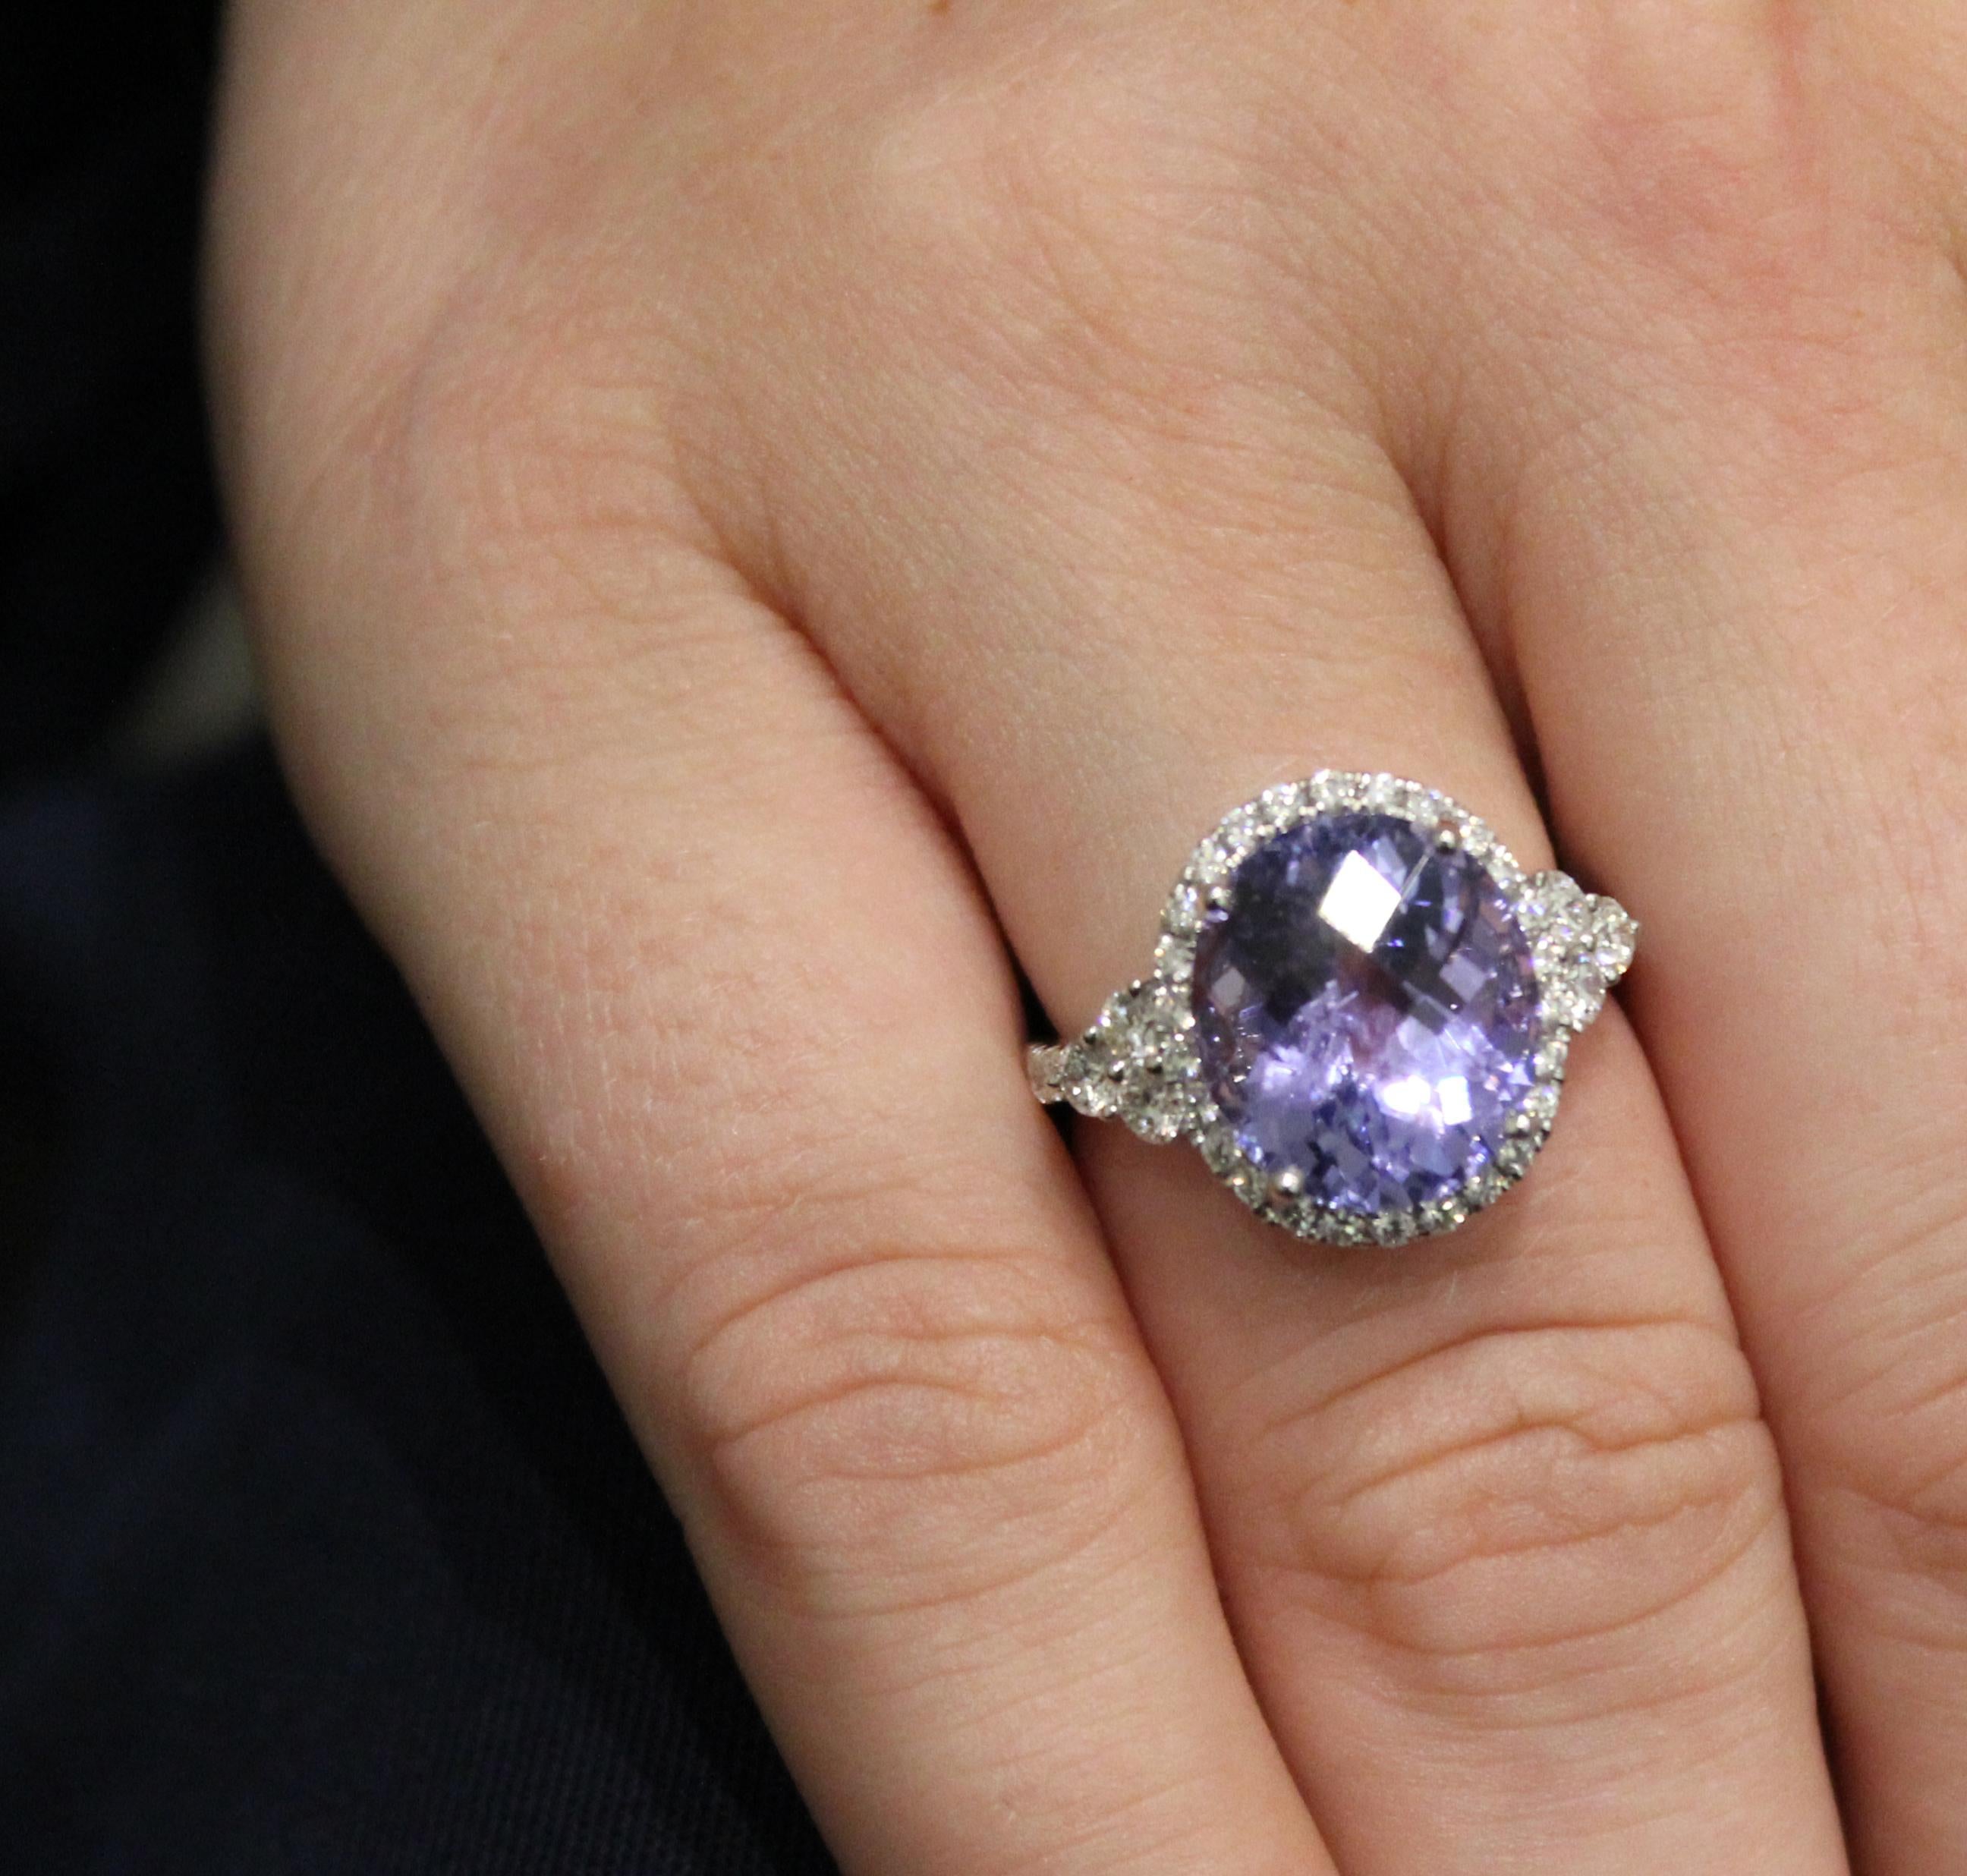 A striking 6.92ct Tanzanite and Diamond (0.76ct) ring set in 18ct White Gold. The oval cut centre stone is accentuated by the diamond tapered arms which show off the beautifully faceted stone.  When you move, the stone catches the light in such a